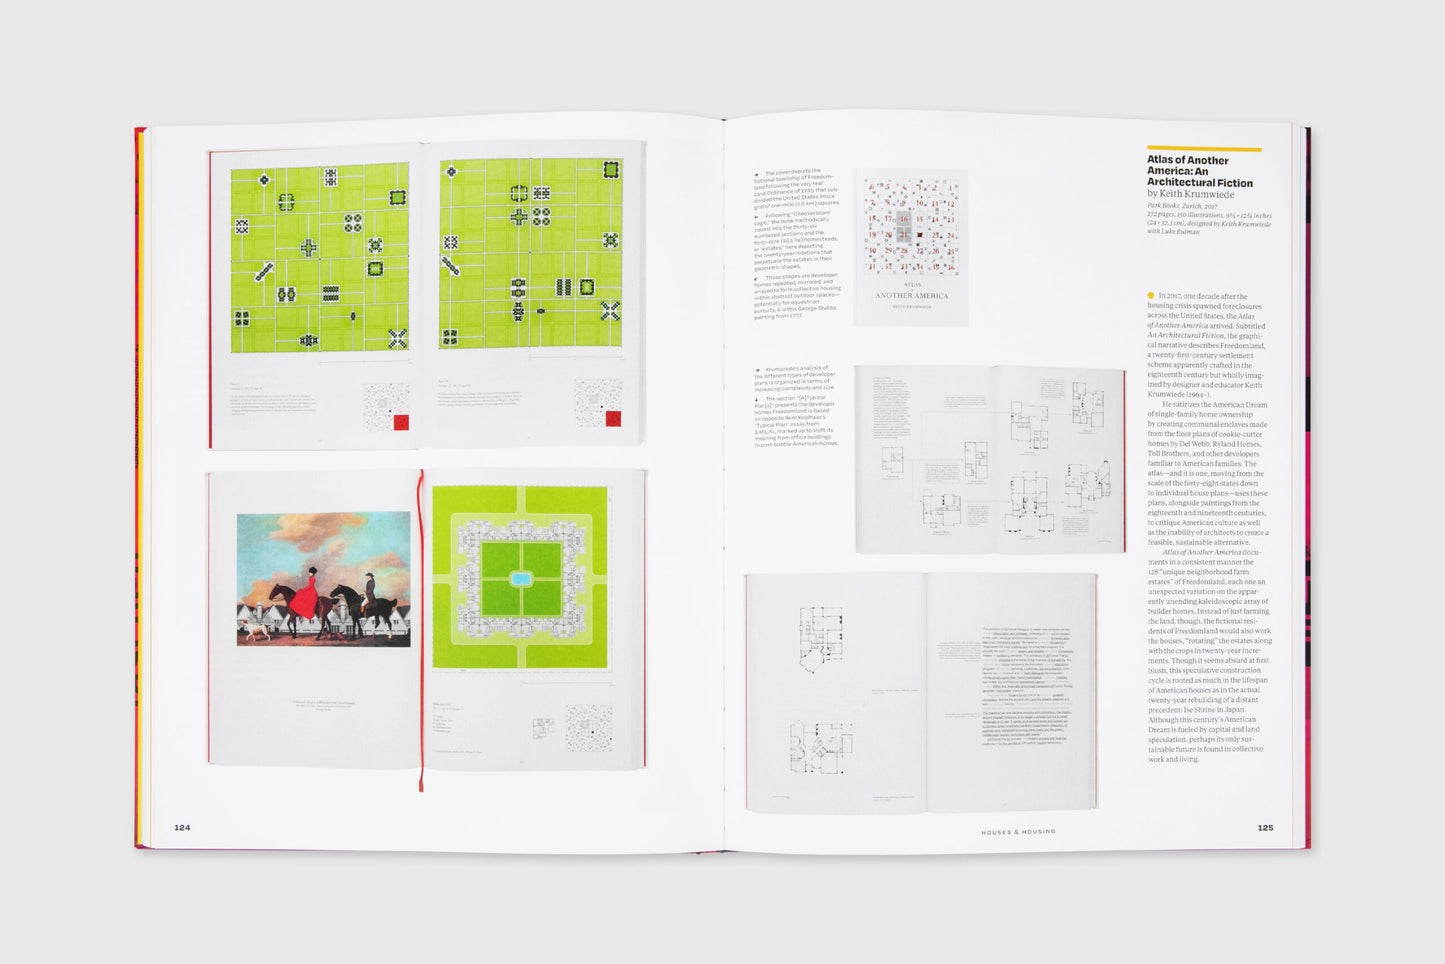 Buildings in Print: 100 Influential & Inspiring Architecture Books